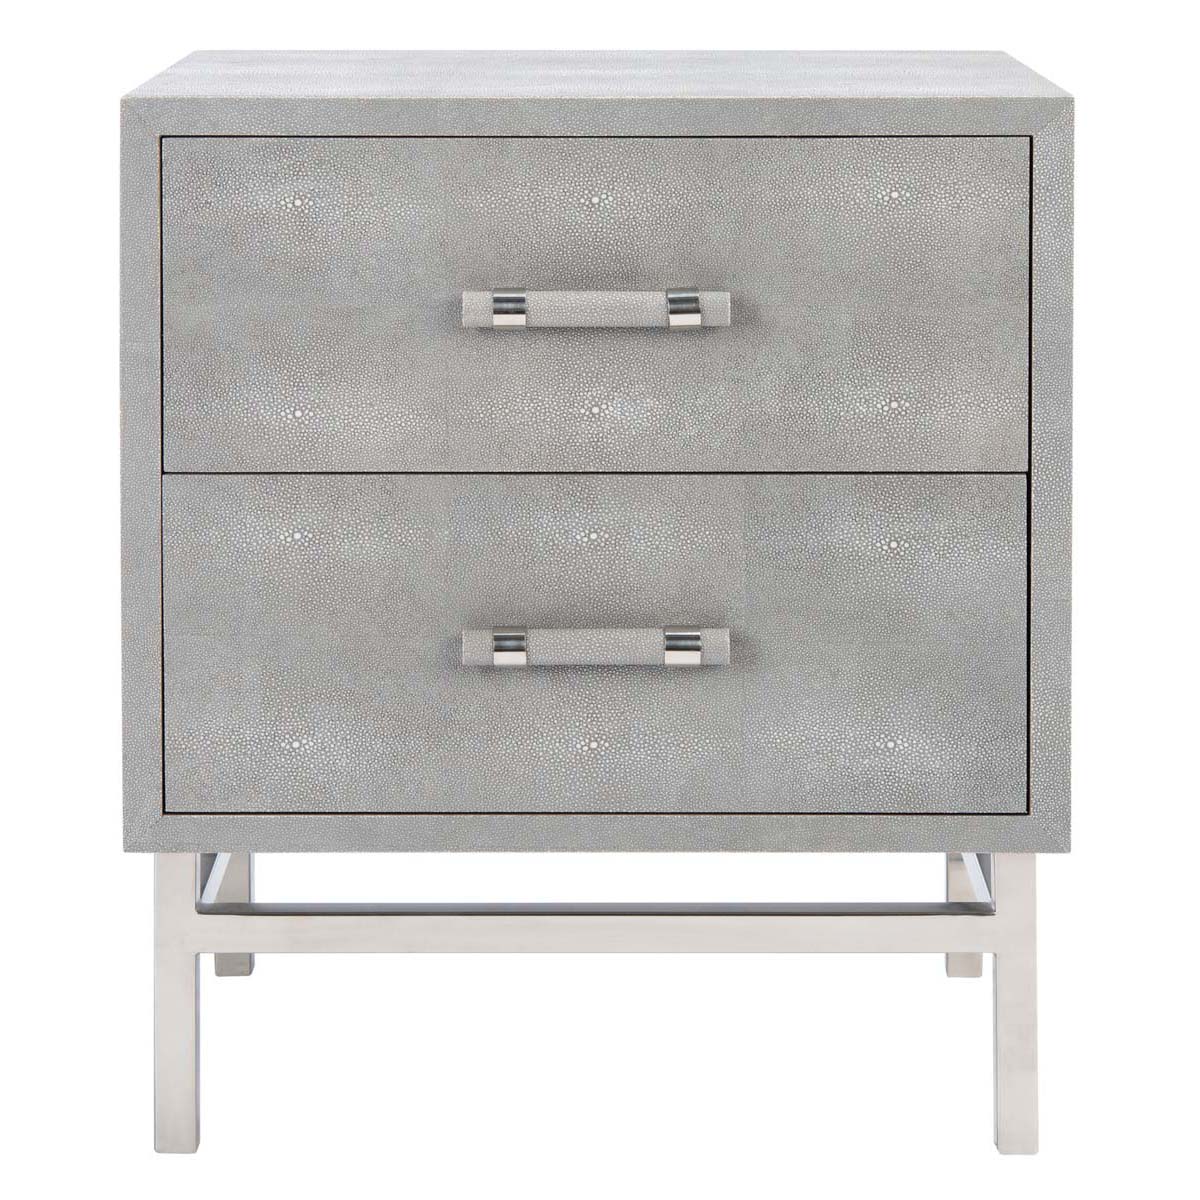 Safavieh Couture Ranger Faux Shagreen Nightstand